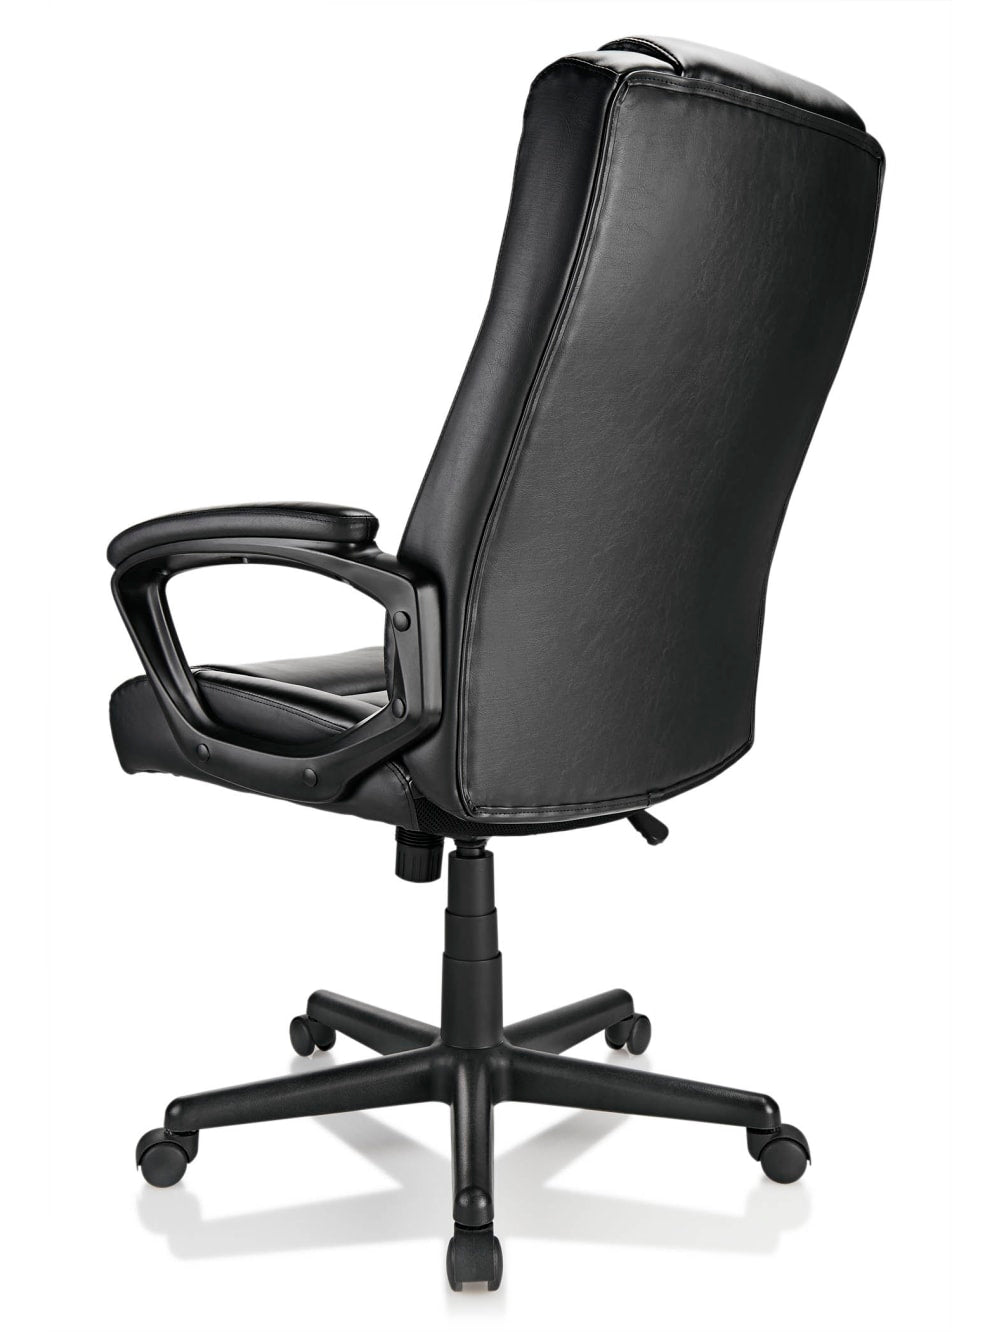 Realspace Hurston Bonded Leather High Back Executive Chair Black